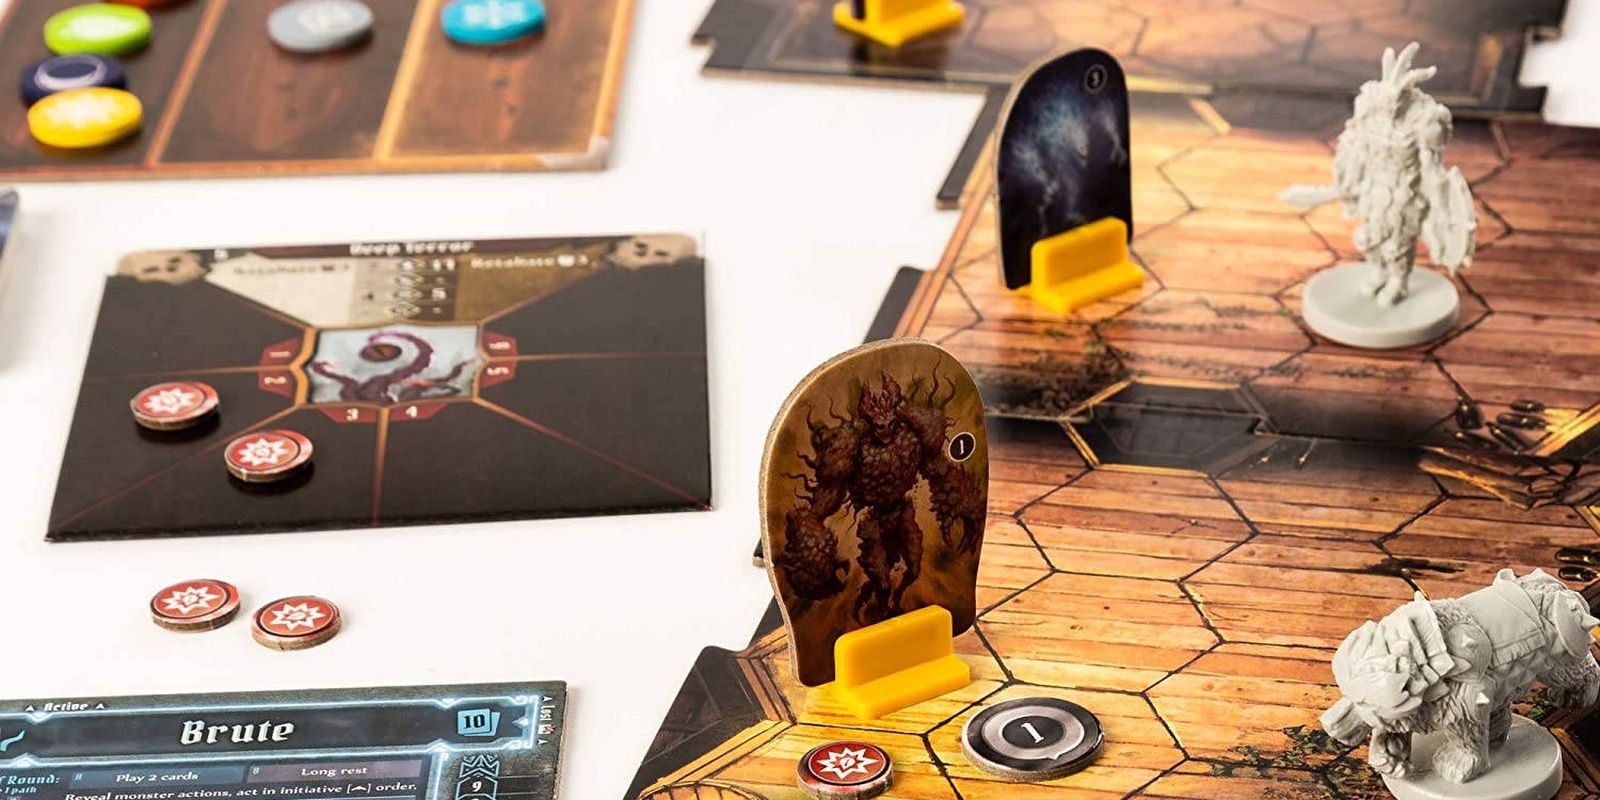 Player characters in combat in Gloomhaven fantasy board game.